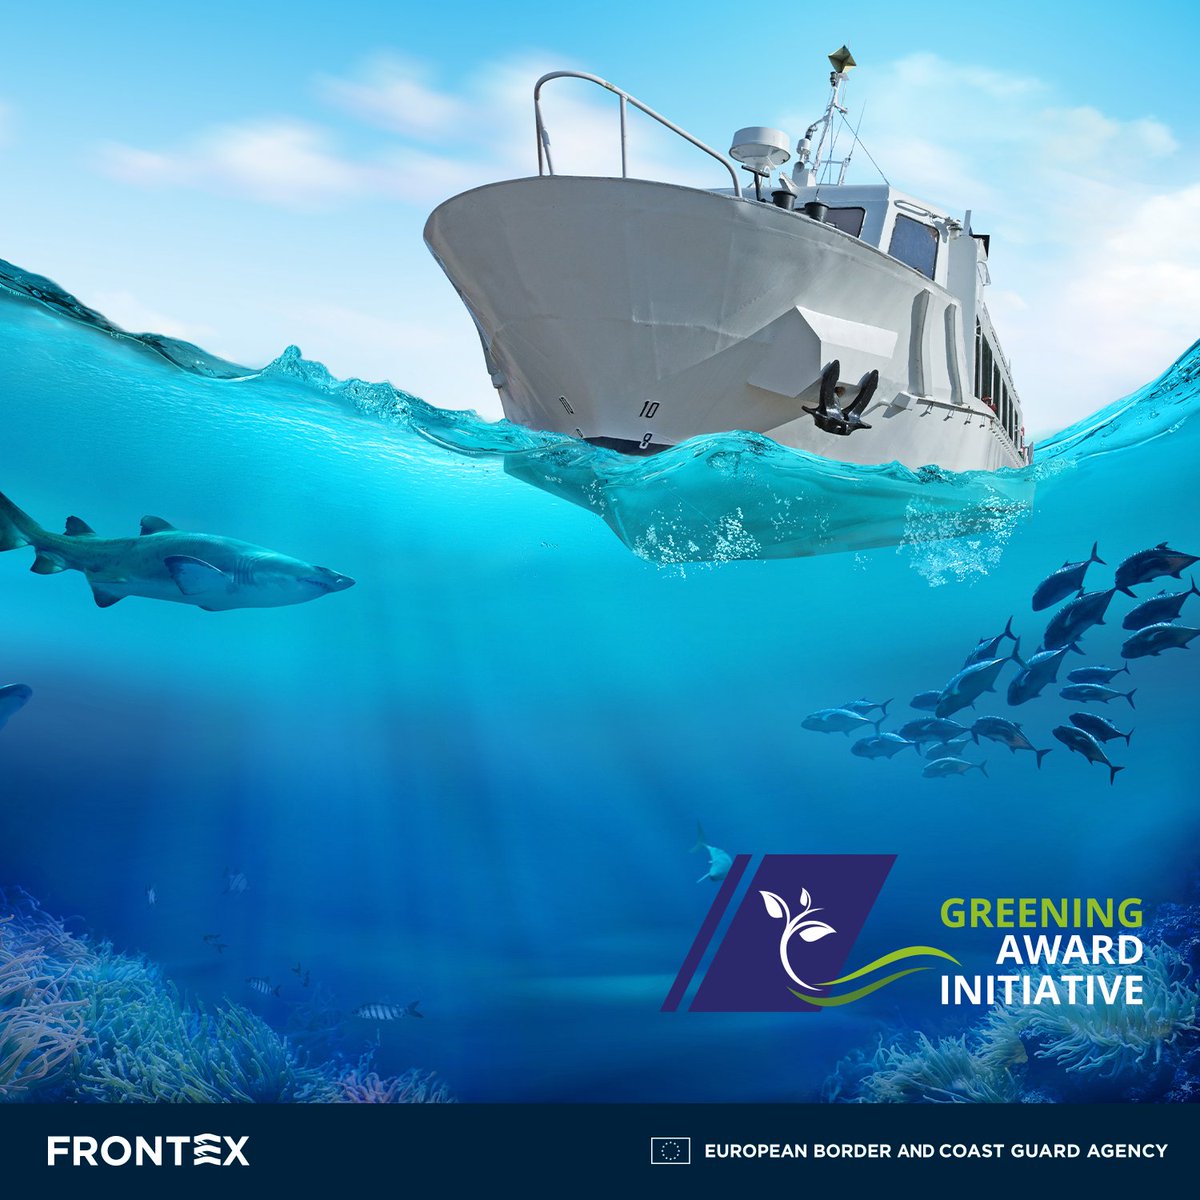 ⭐ Meet the finalist in the #GreeningAwardInitiative!
18 greening projects from the European coast guard community compete for the first-ever greening award in the maritime sector 🌊 Meet them all at Greening Award Initiative: frontex.europa.eu/media-centre/n… and find out the winners at